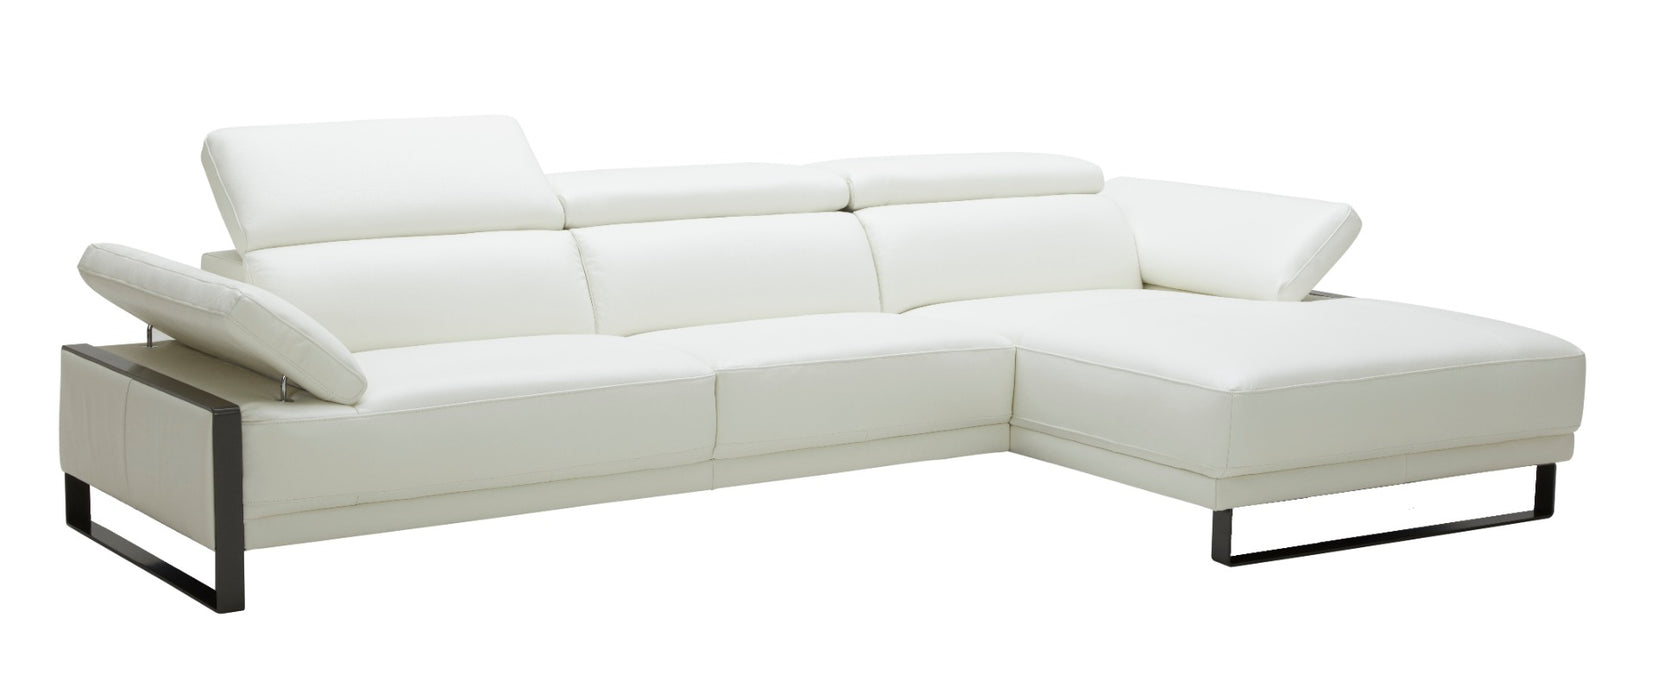 J&M Furniture - Fleurier Sectional in Right Hand Facing - 17246-RHFC